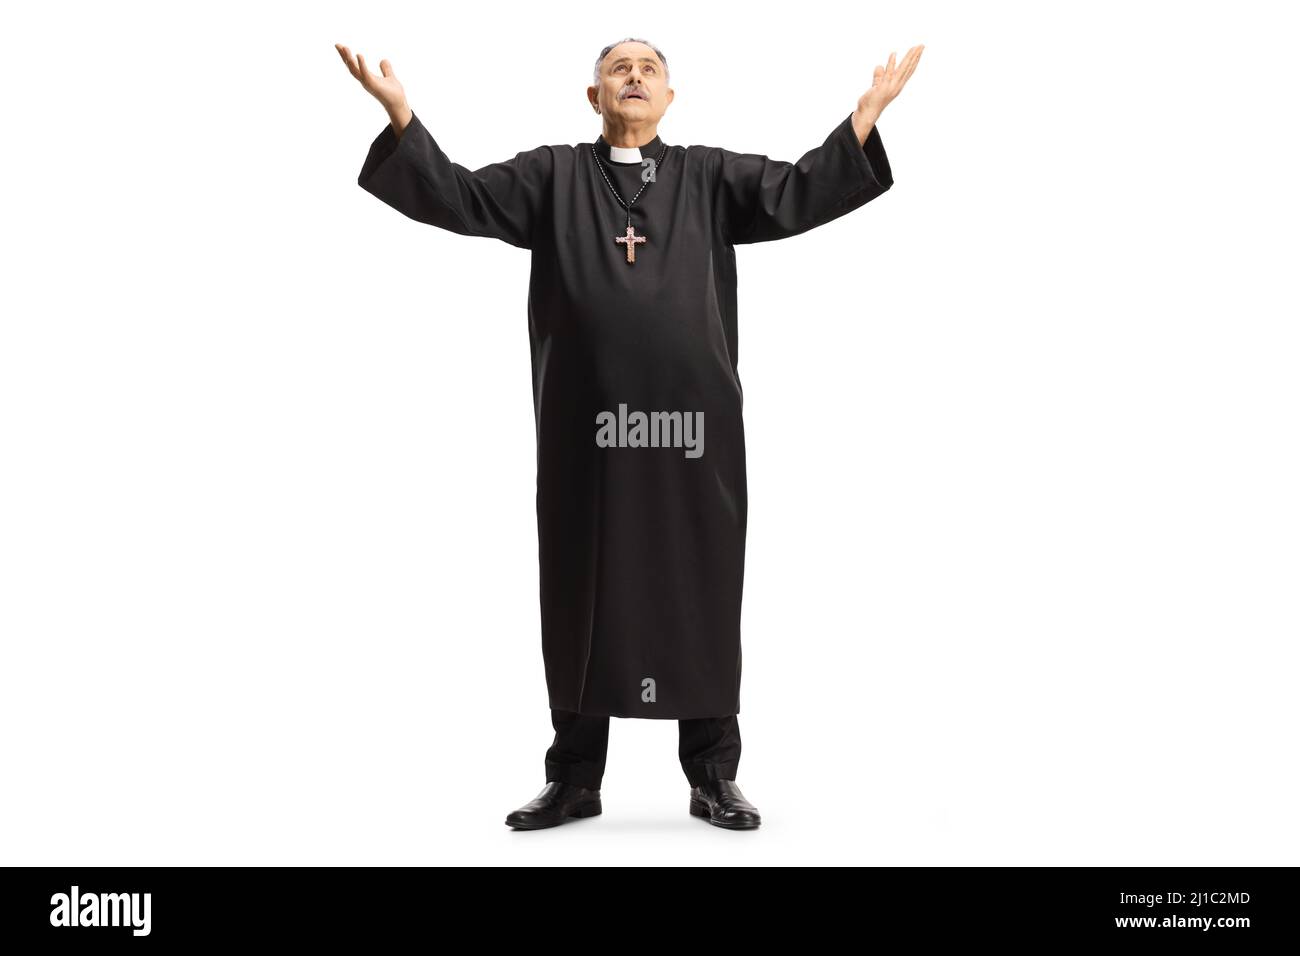 Full length portrait of a priest raising arms towards sky isolated on white background Stock Photo